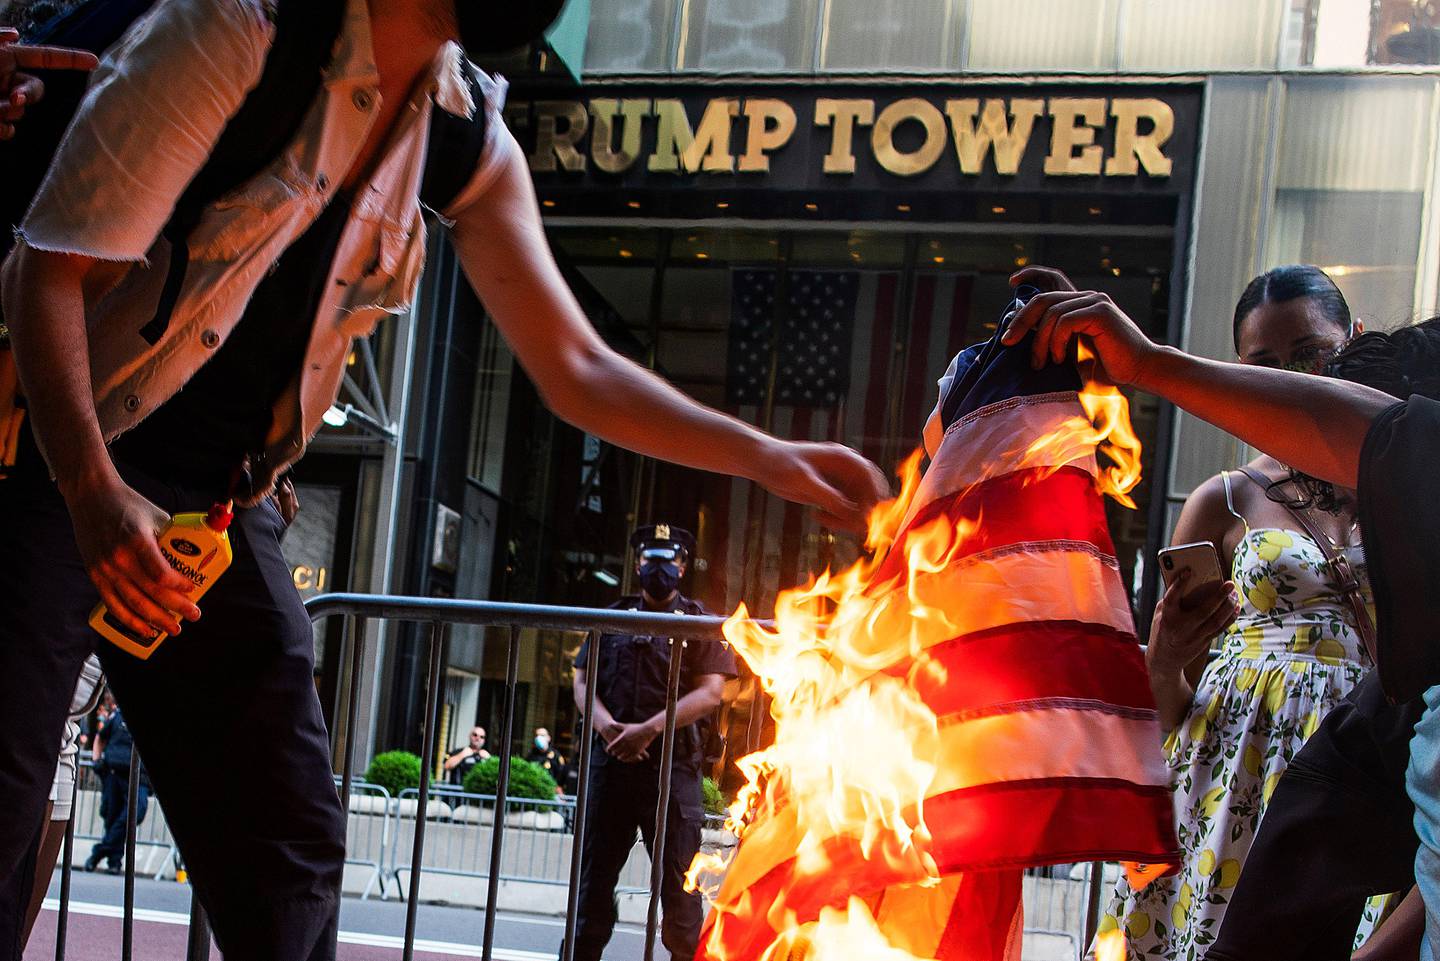 Protesters burn American flags during a protest in front of Trump Tower, Saturday, July 4, 2020, in New York. (AP Photo/Eduardo Munoz Alvarez)